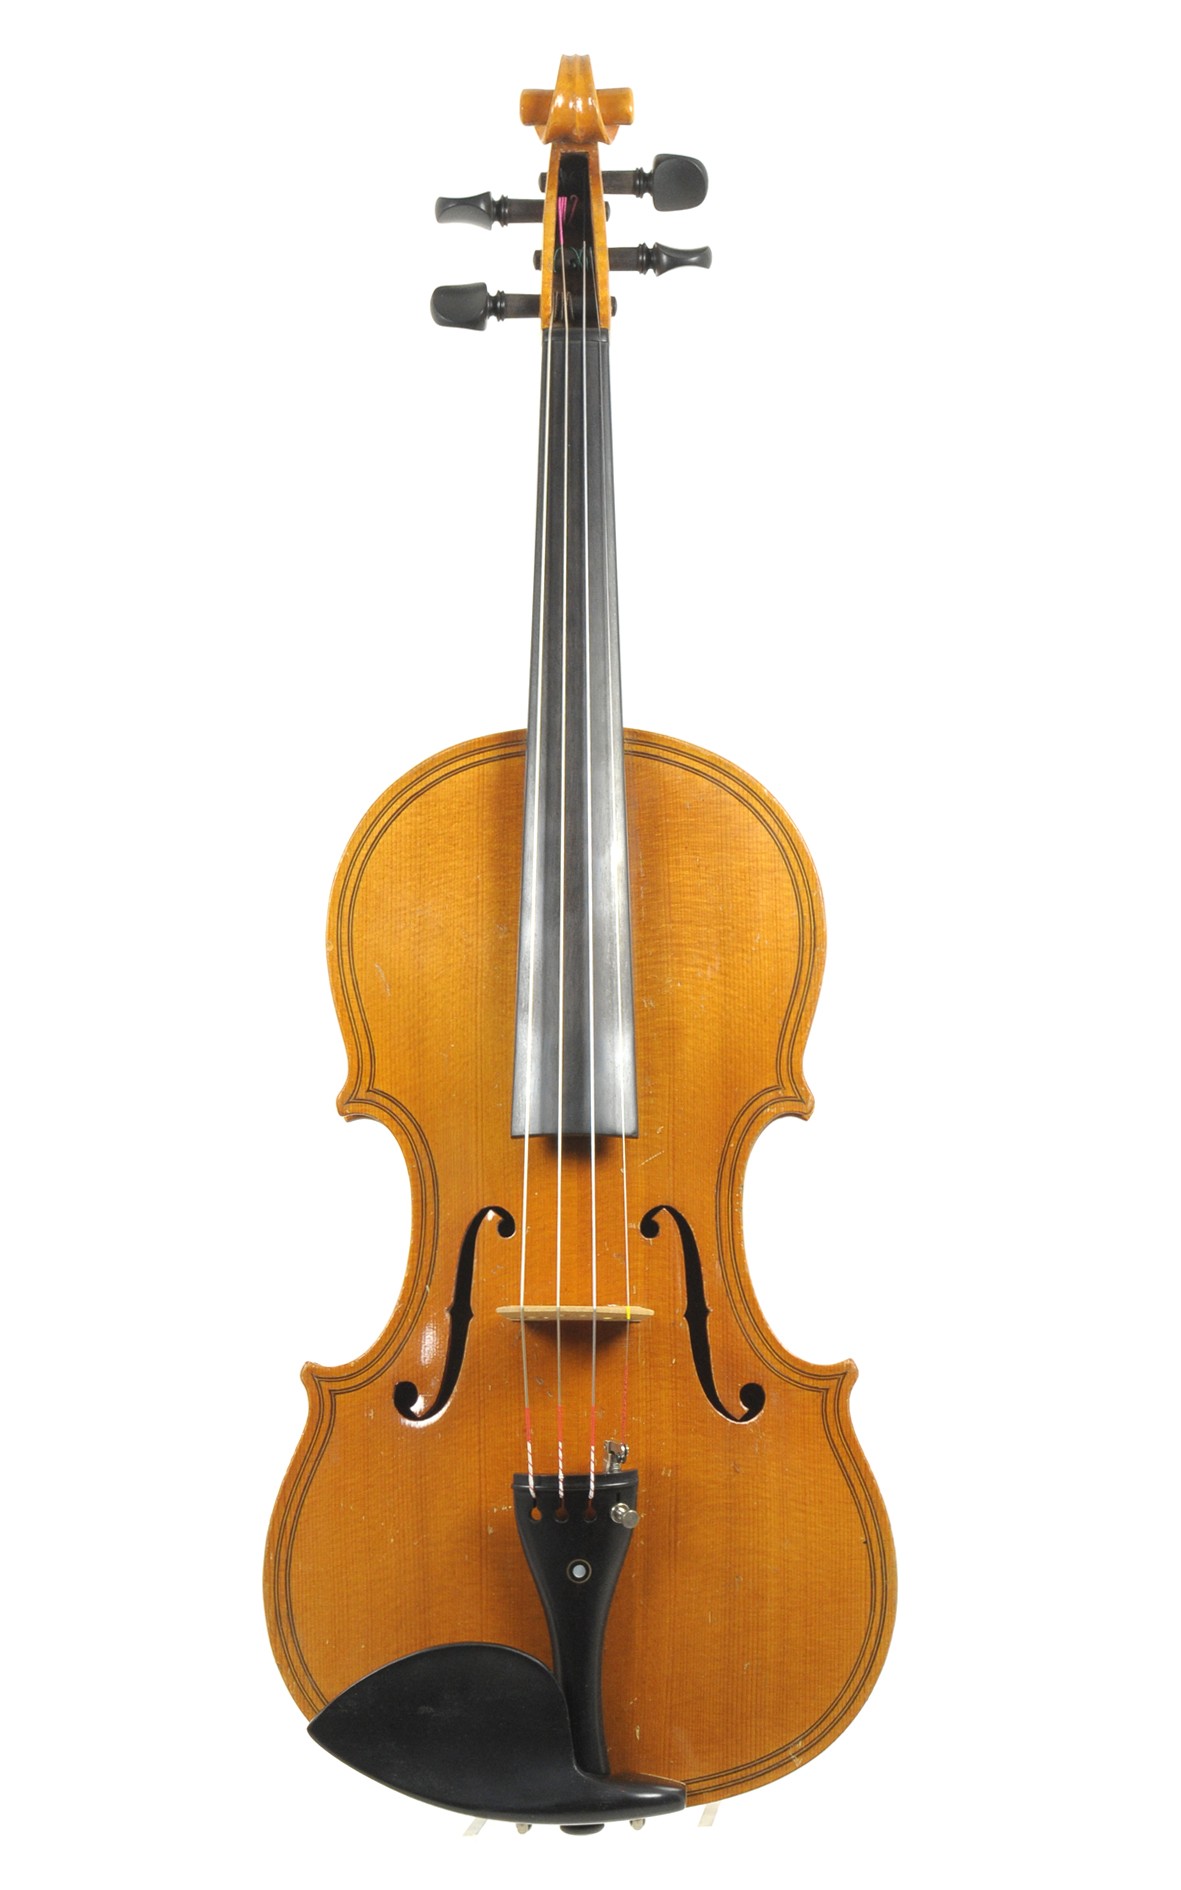 Da Salo copy, violin from Markneukirchen - front view